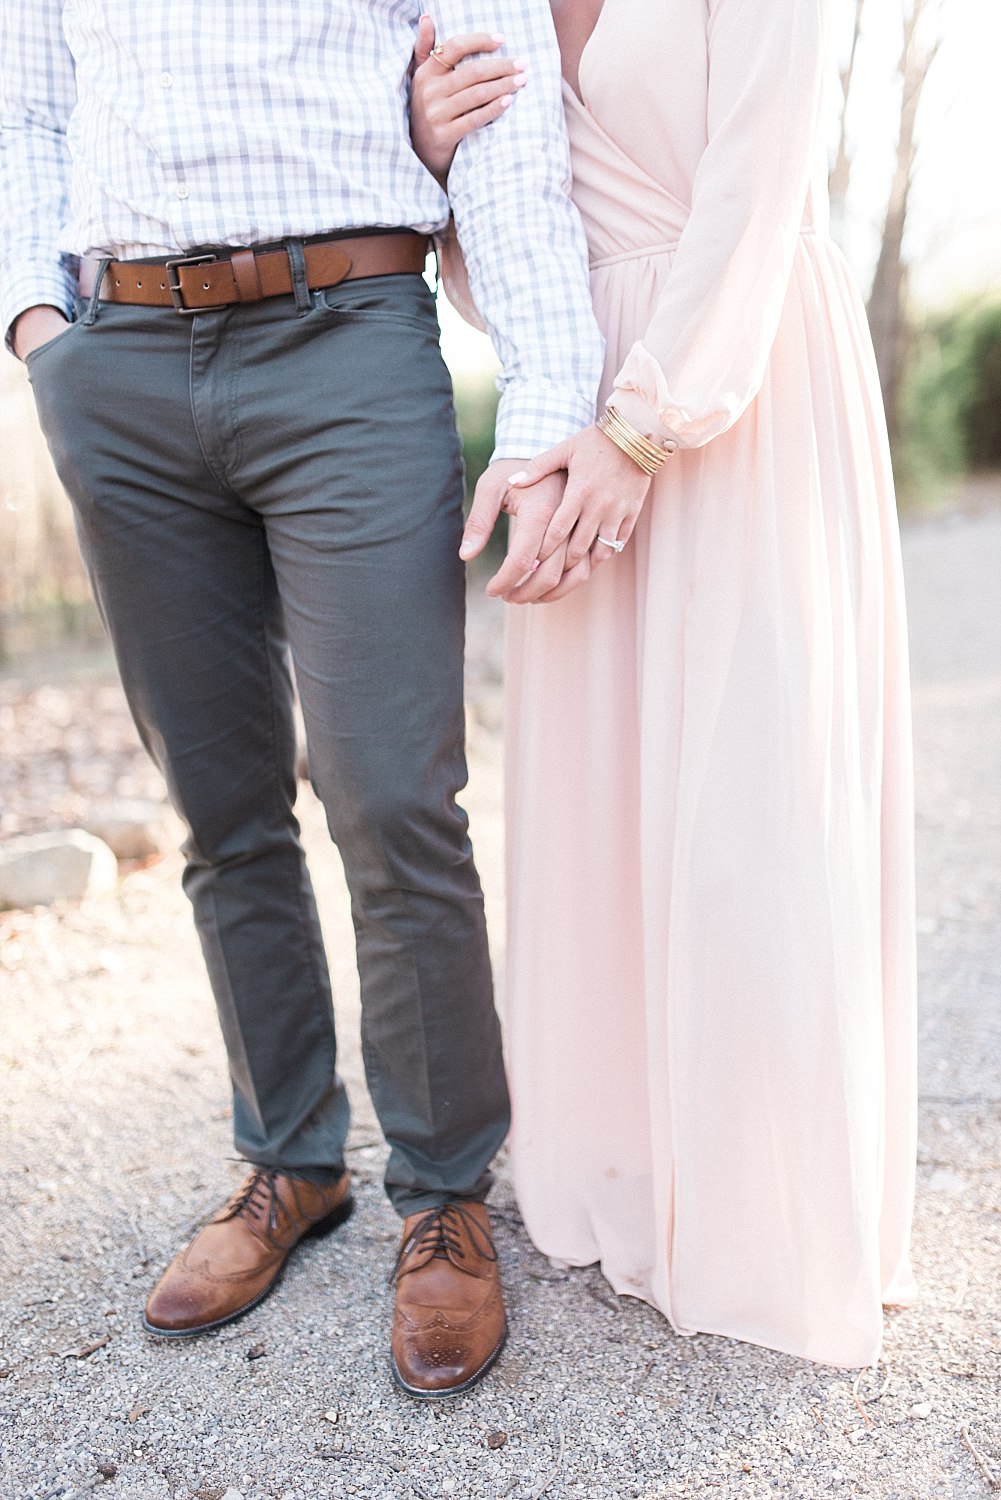 Knoxville Botanical Garden Engagement | Knoxville Wedding Photographer | Juicebeats Photography | Knoxville Engagement